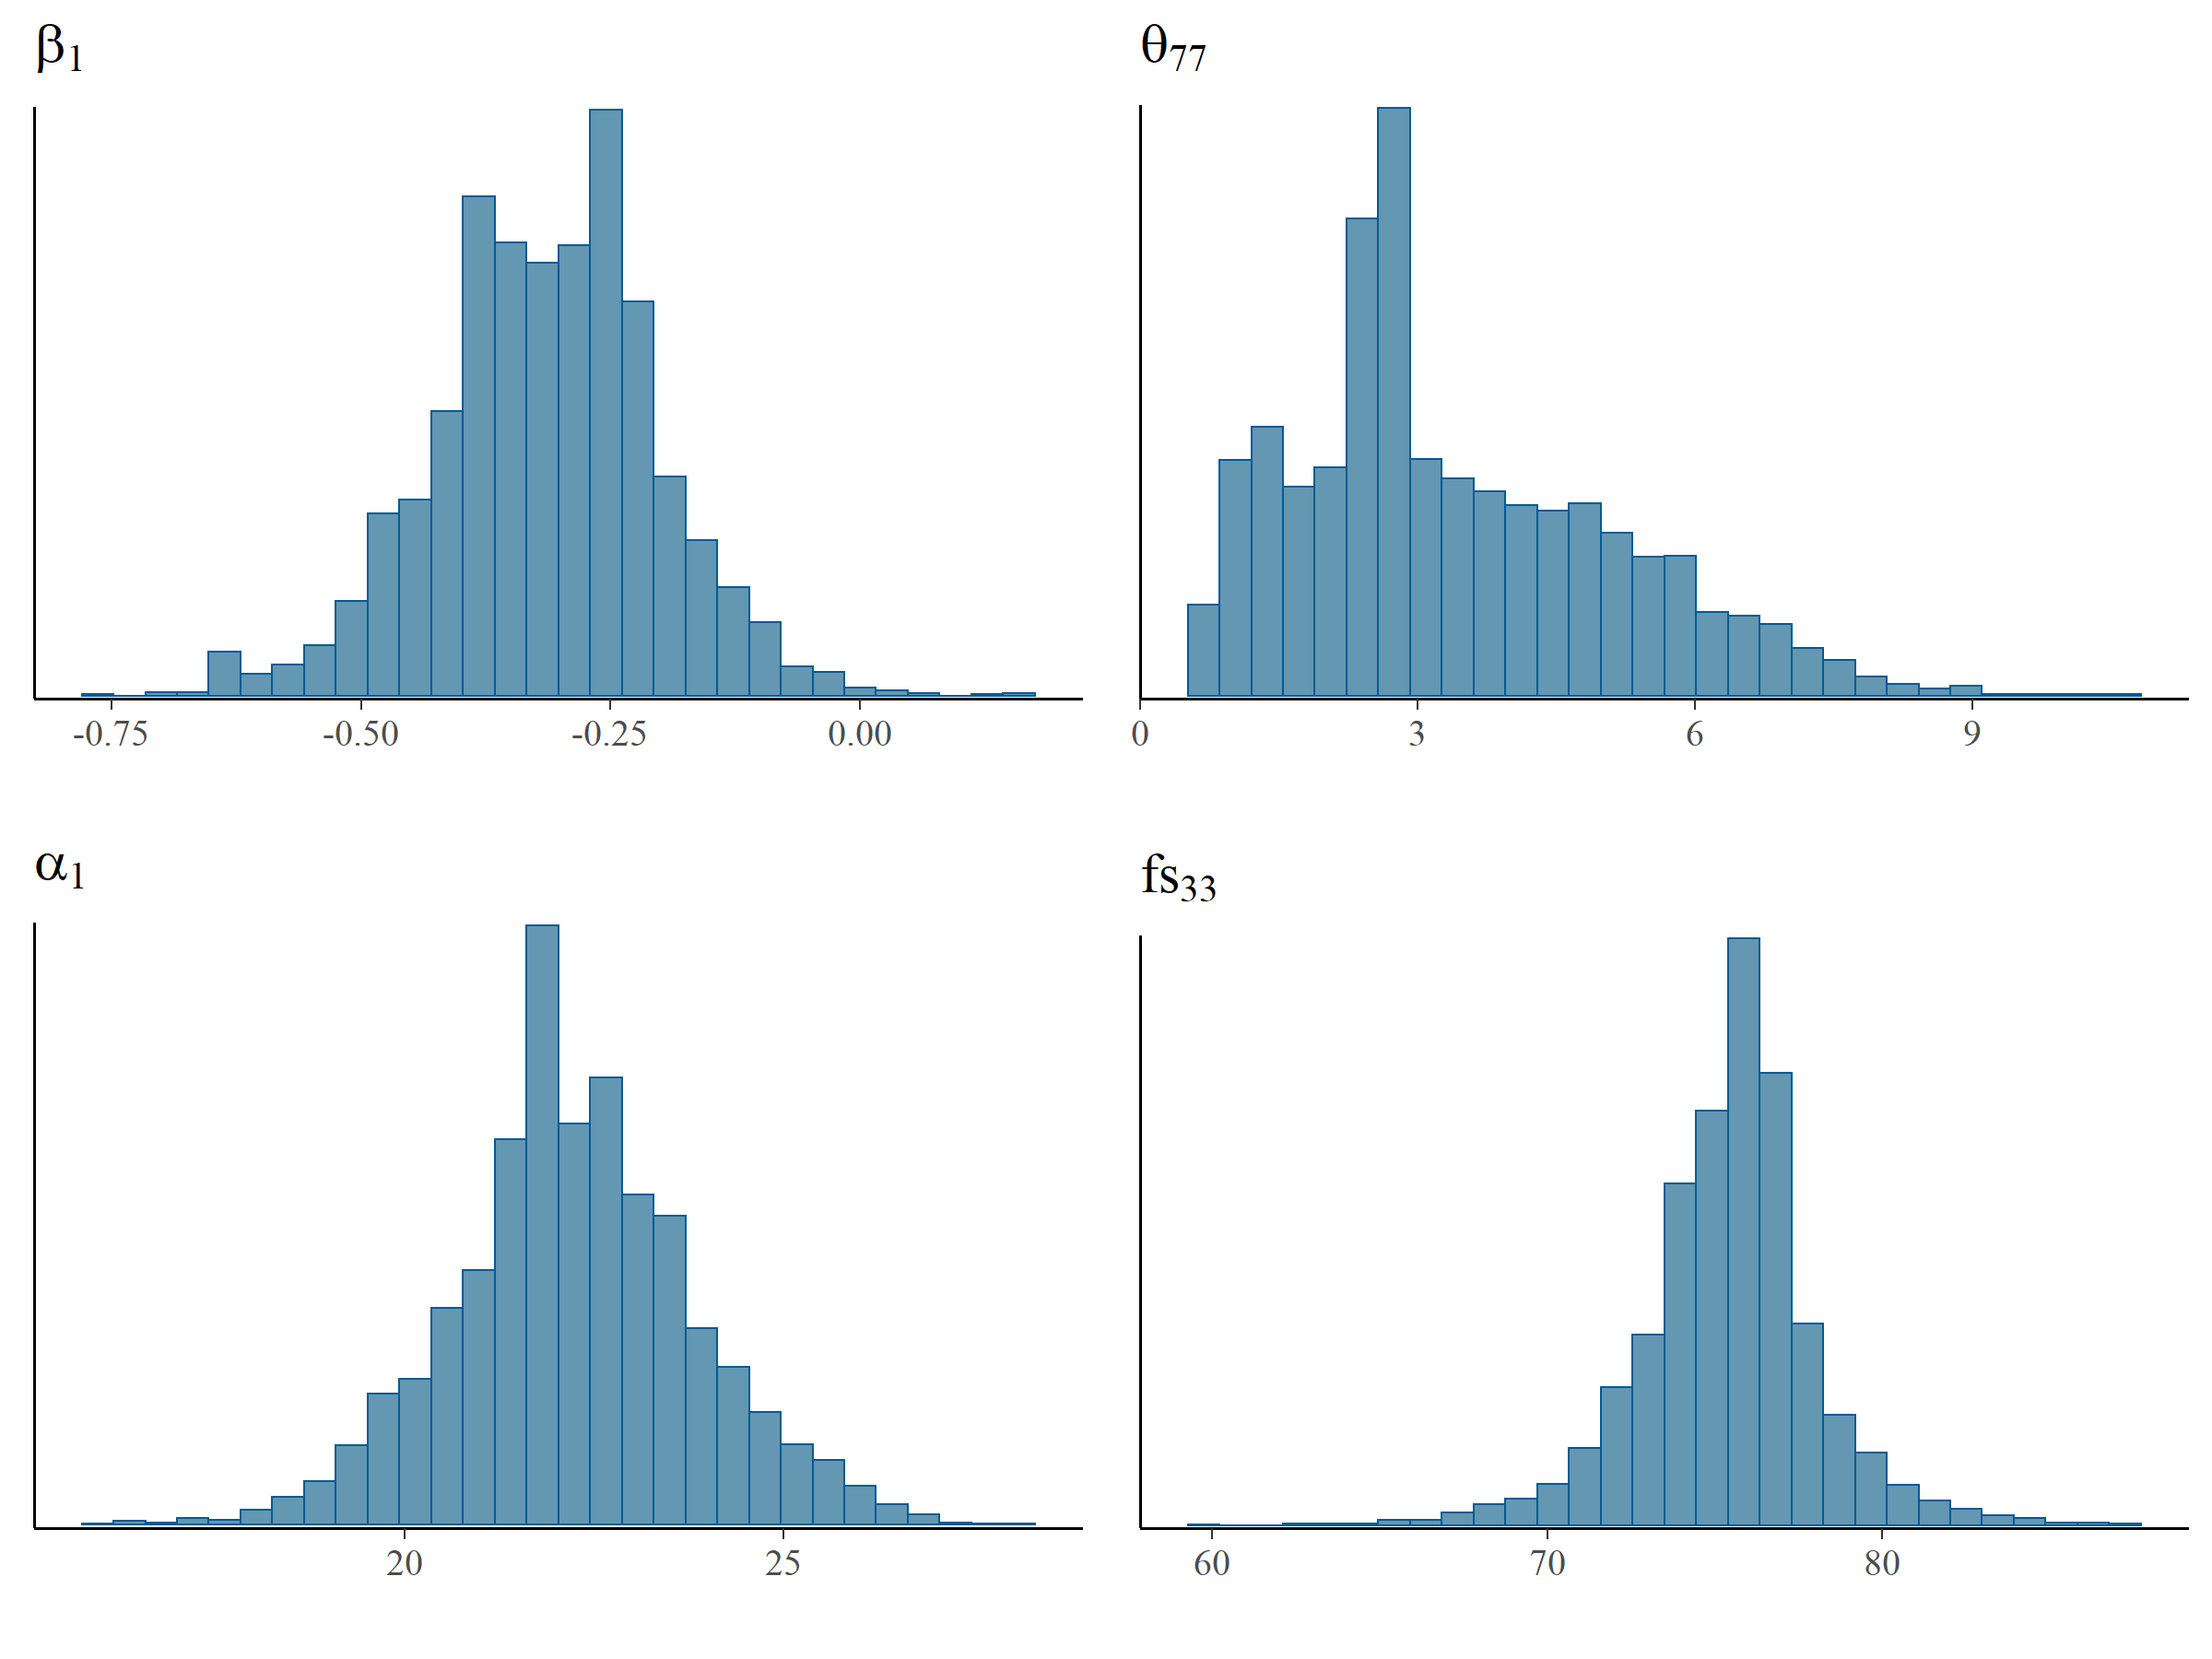 Histograms of MCMC samples for $\alpha_1, \beta_1, \theta_{77}$ and $fs_{33}$. $\theta_{77}$ has a non-smooth histogram, which indicates low ESS while the smooth histogram for $fs_{33}$ is indicative of higher ESS.